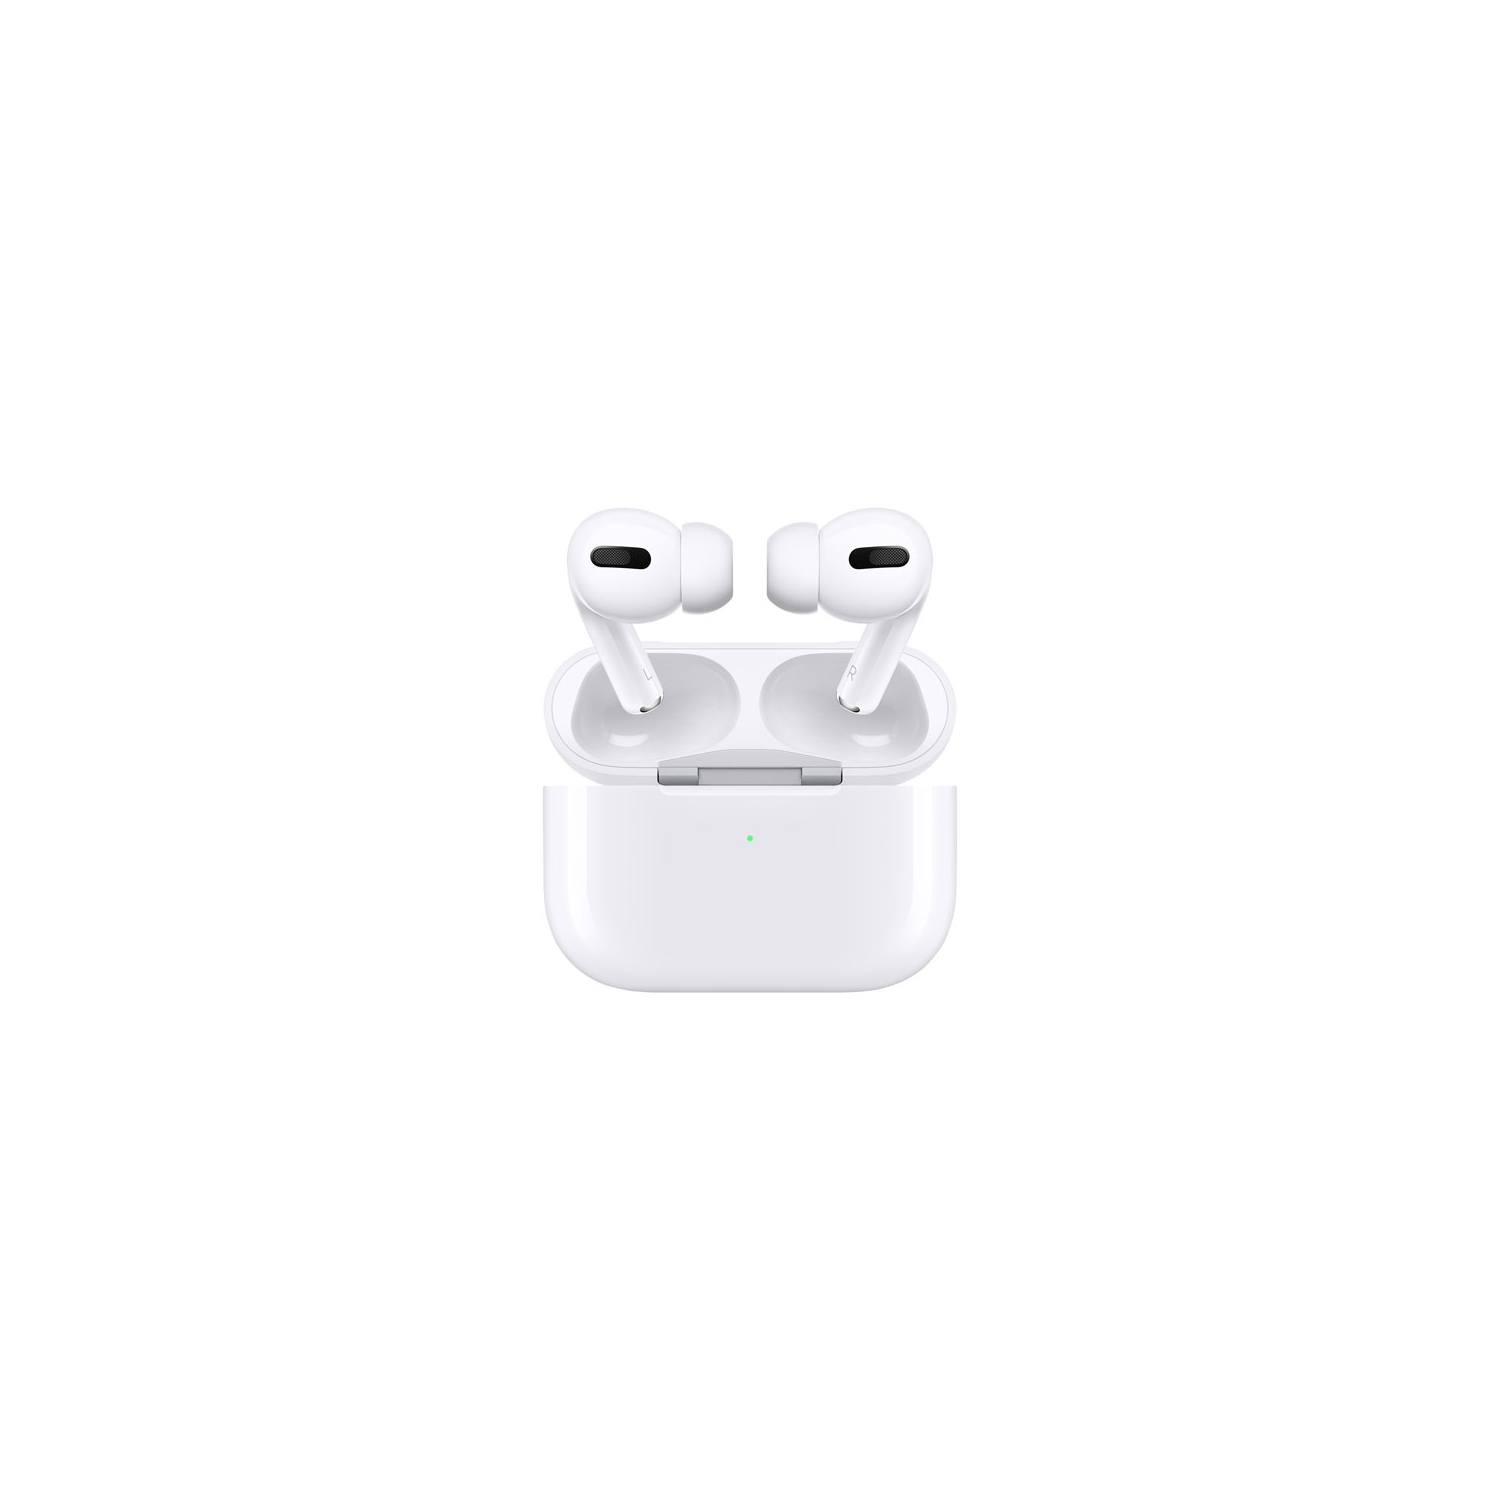 Refurbished (Fair) - Apple AirPods Pro In-Ear Noise Cancelling Truly Wireless Headphones with MagSafe Charging Case - White